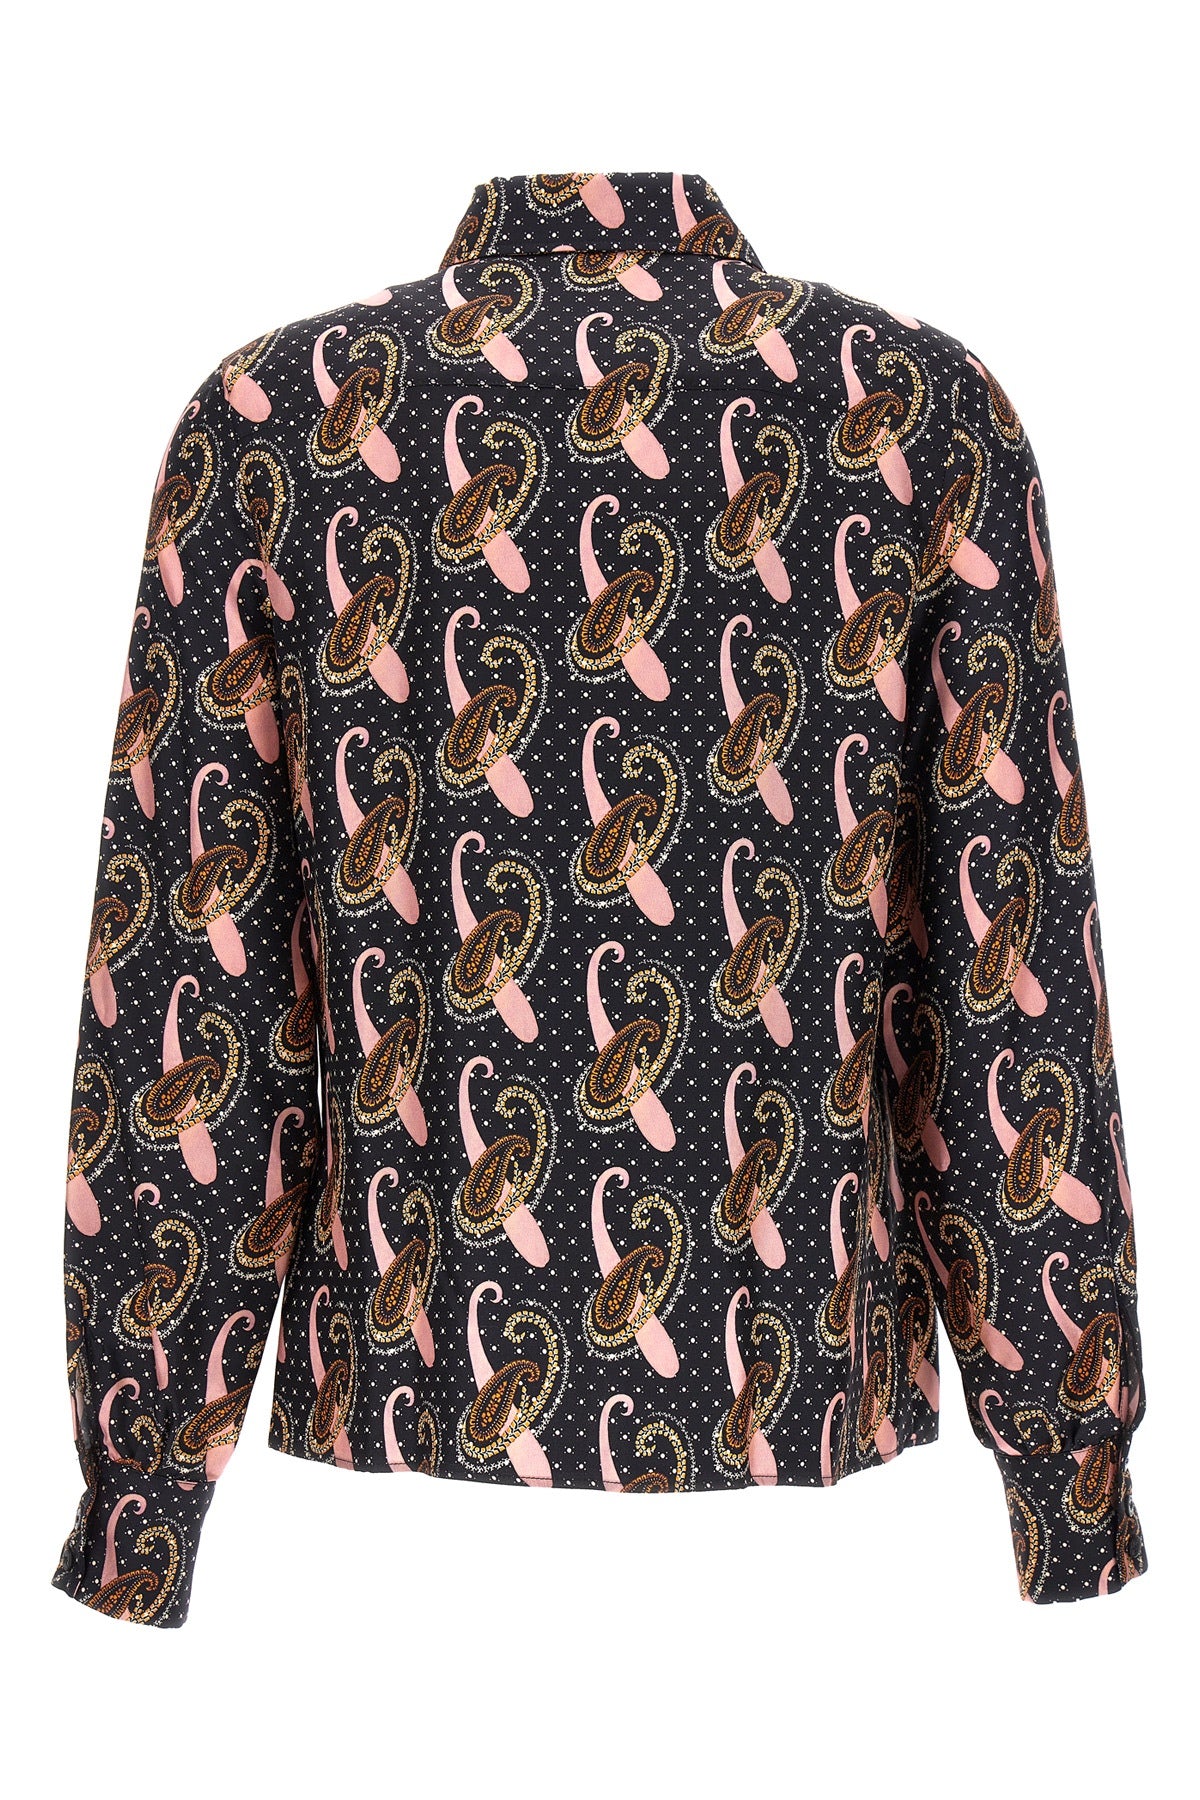 ETRO ALL OVER PRINT SHIRT